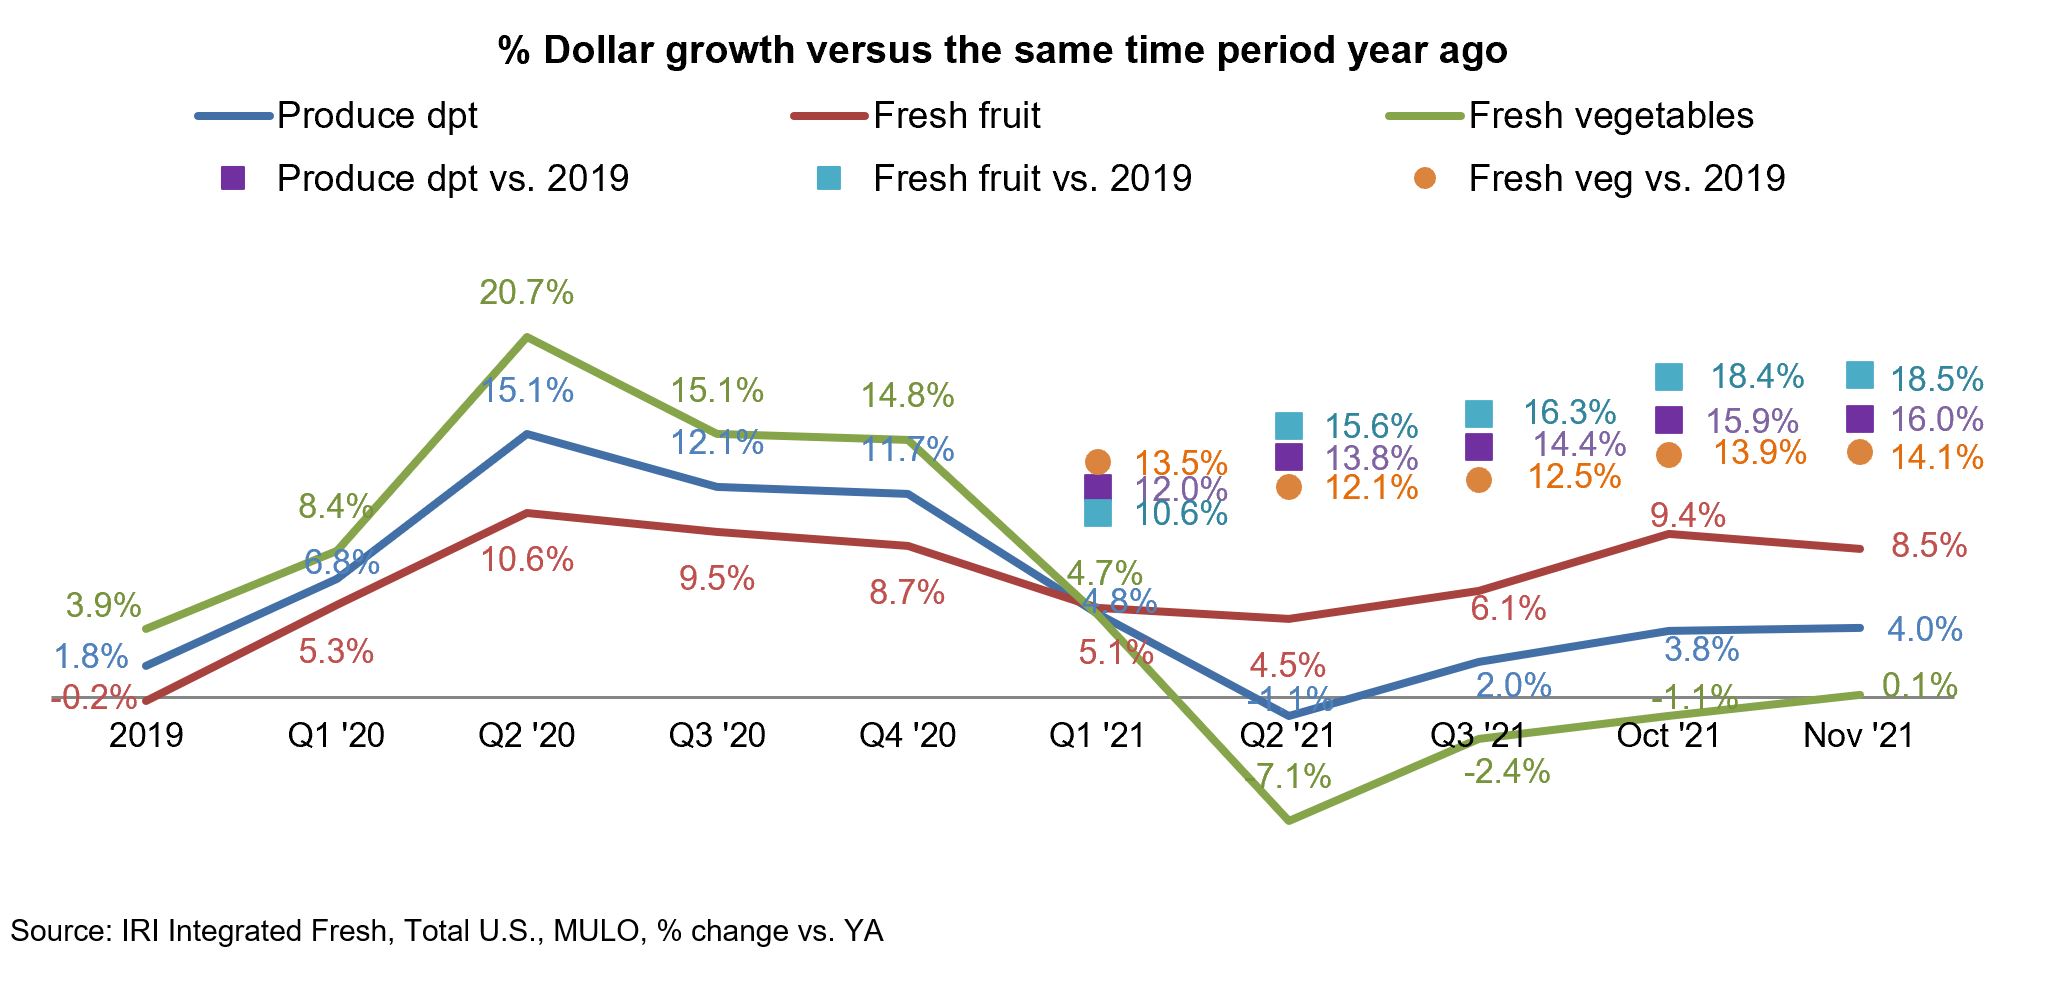 Line graph of the percent change in dollars growth for 2019 to 2021 of produce dept., fresh fruit, and fresh vegetables.